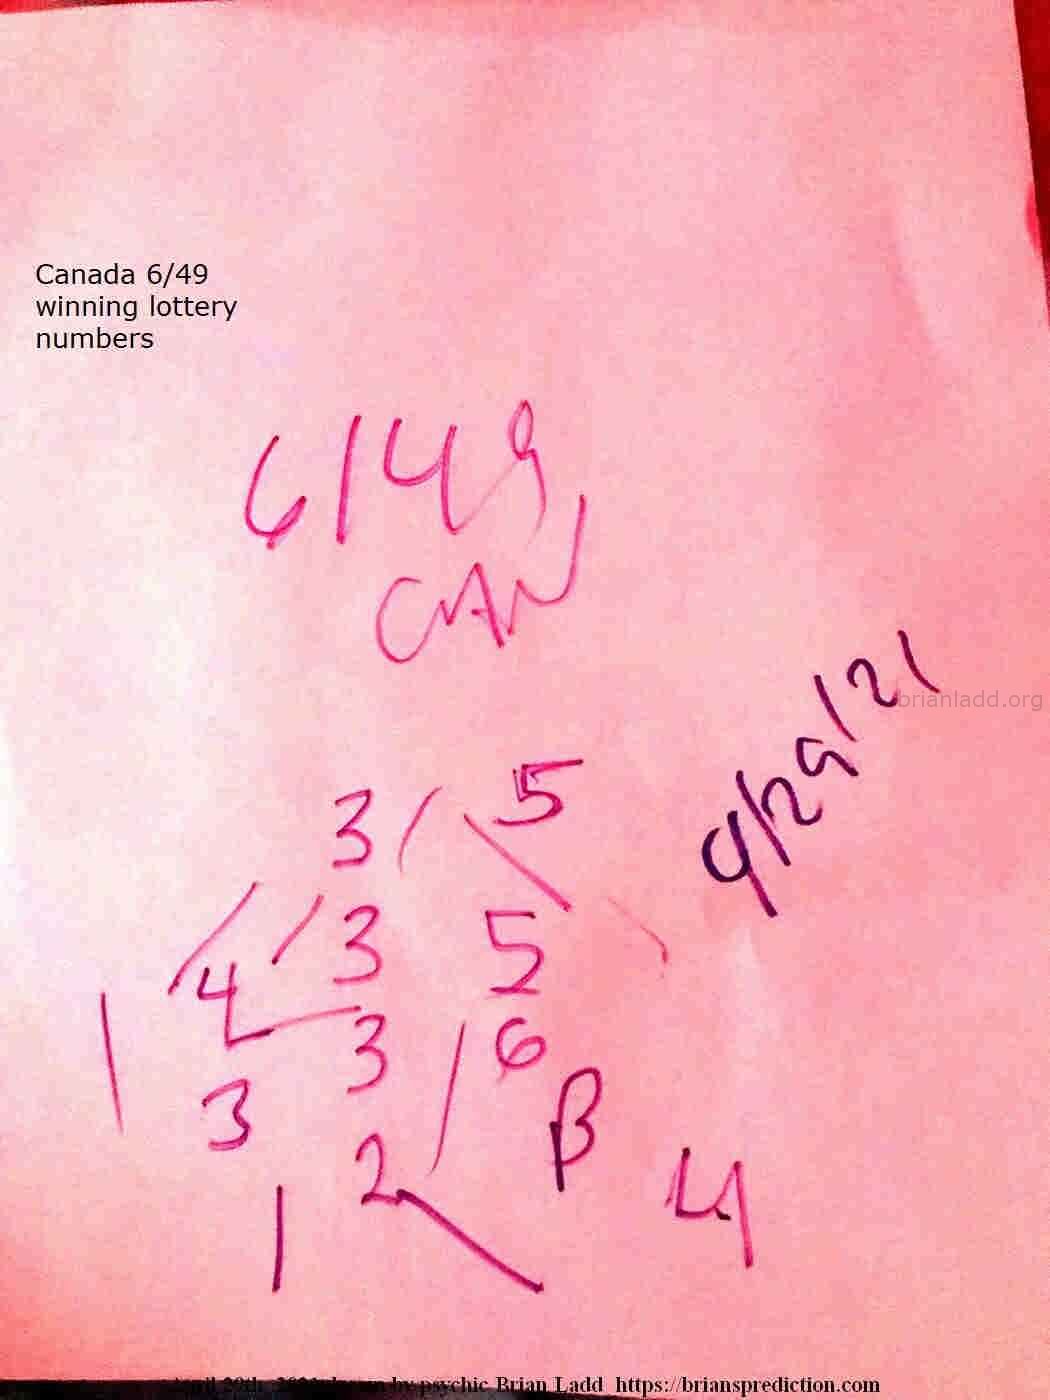 14810 29 April 2021 5 - Canada 6/49 Winning Lottery Numbers....
Canada 6/49 Winning Lottery Numbers.  ( NEW!  Free lottery picks by mail, I will personally fill out your blank lottery sheet and mail it back to you for free, postage is included!  visit  https://briansprediction.com/picksbymail   )
